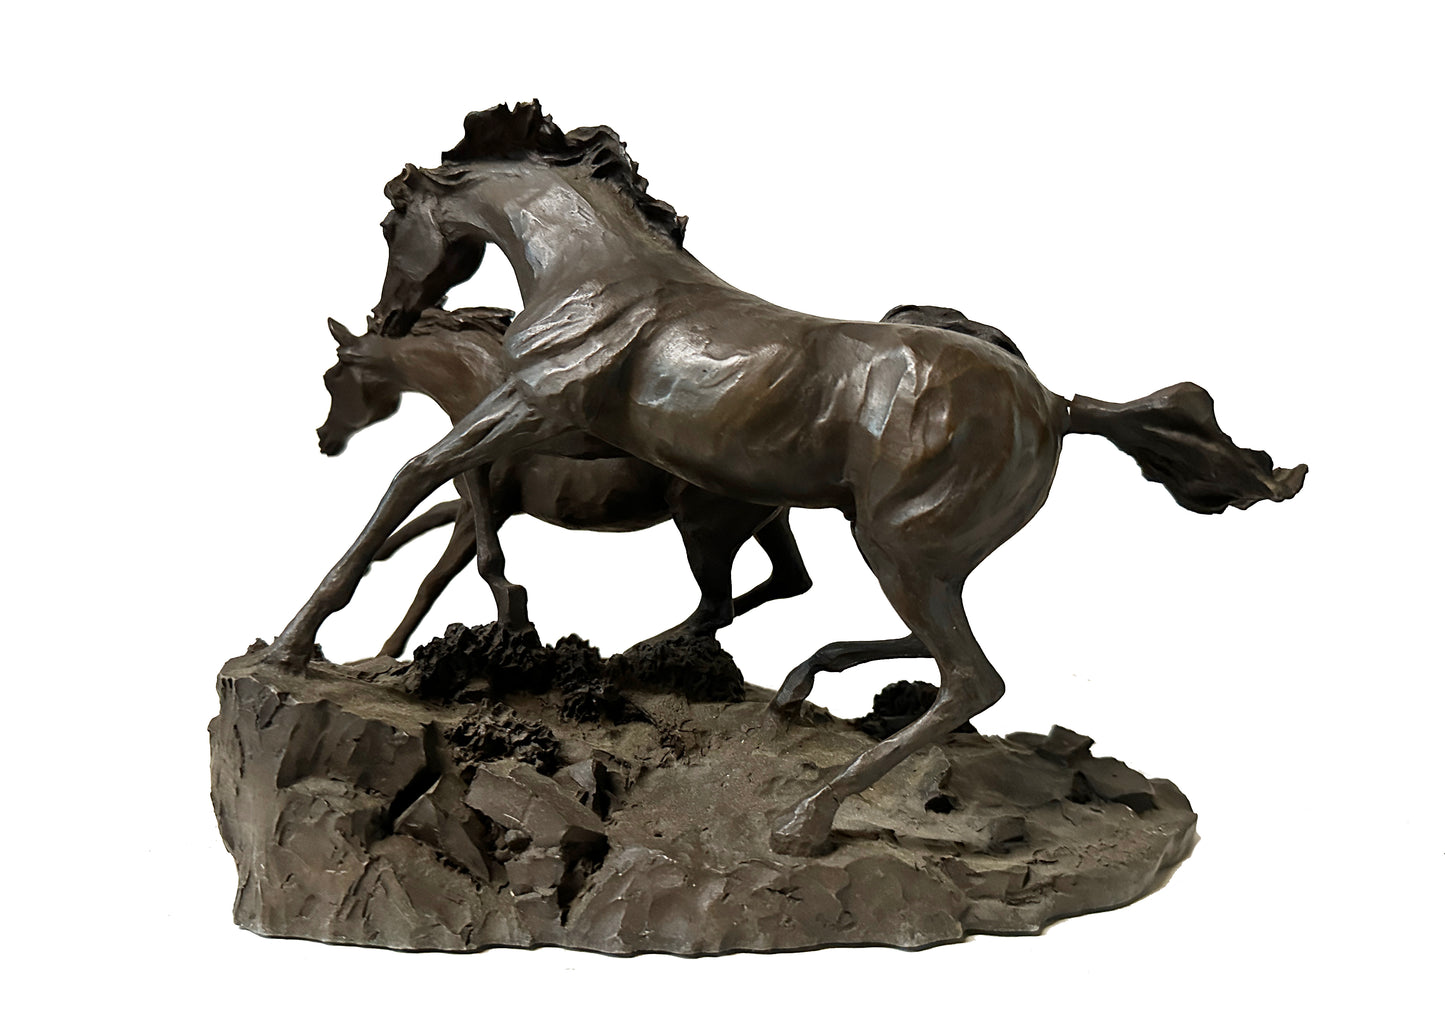 Clay Sculpture of Two Horses - "Morning on the Montana Plains" by Lanford Monroe